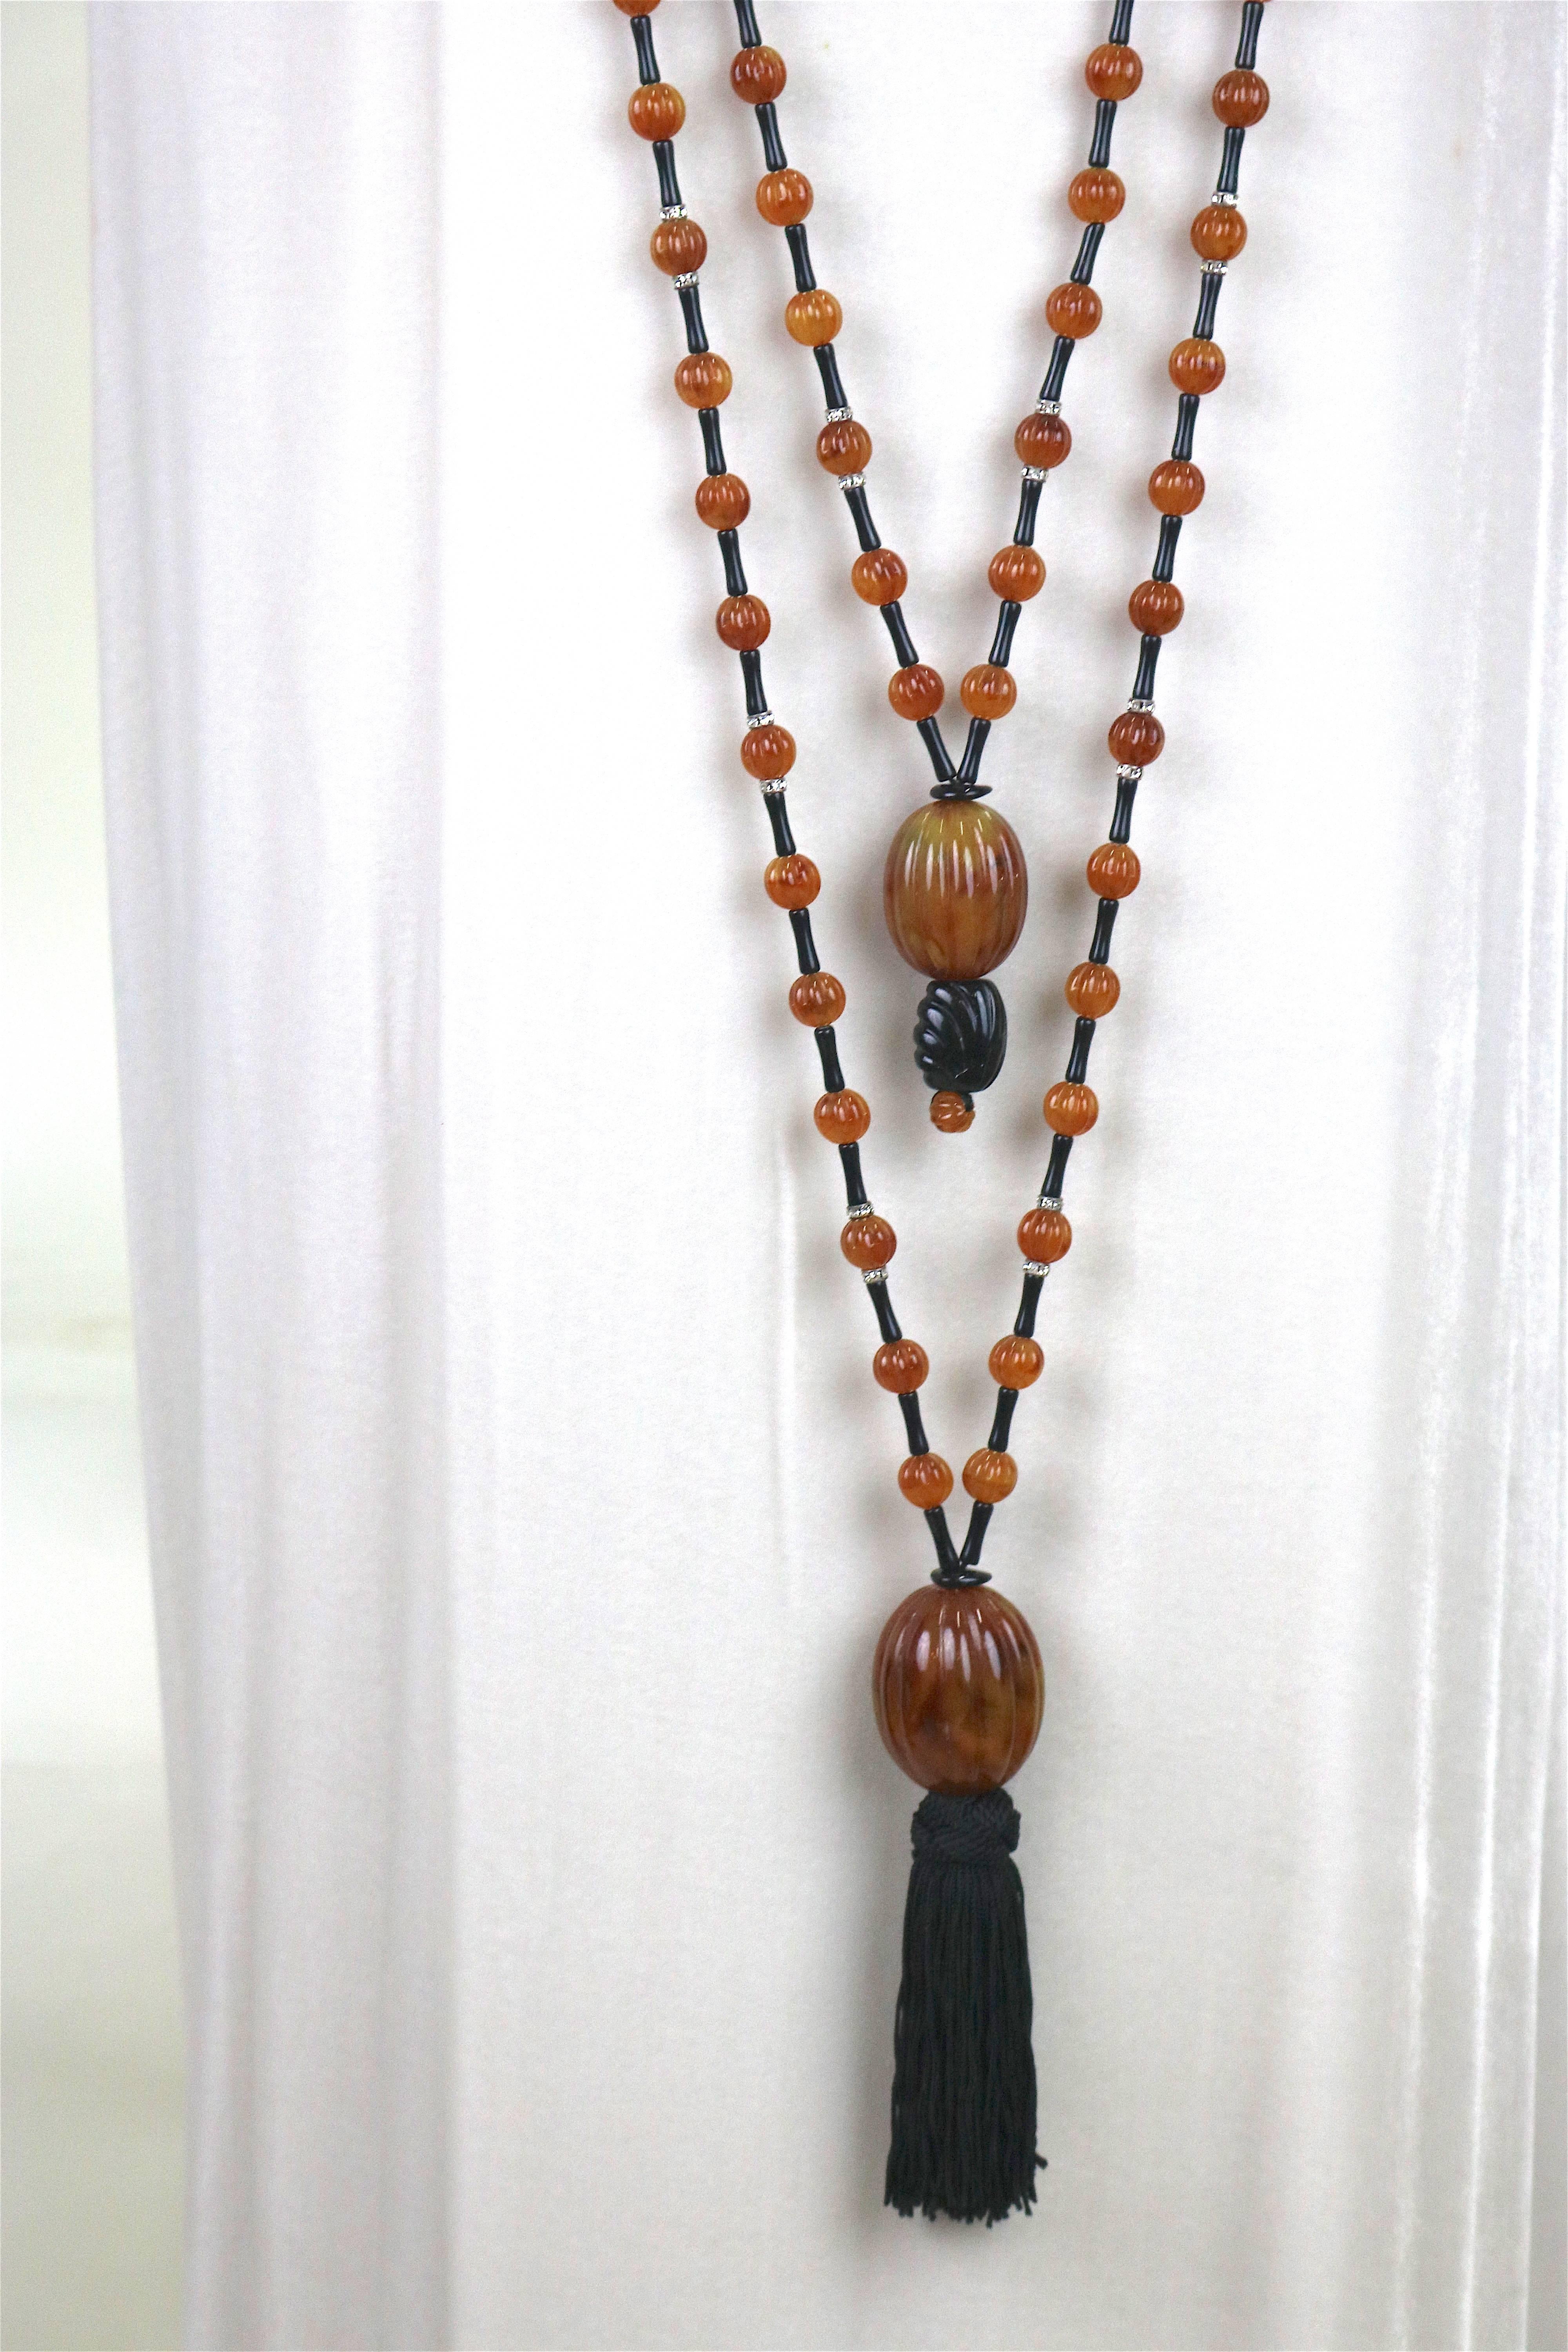 Dramatic Double Bead Necklace ending in Tassels by renowned jewelry designer Angela Caputi Of Florence Italy.
Long double strand necklace in tortoise shell color resin beads, with black resin and several cz collar spacers in the middle and a refined